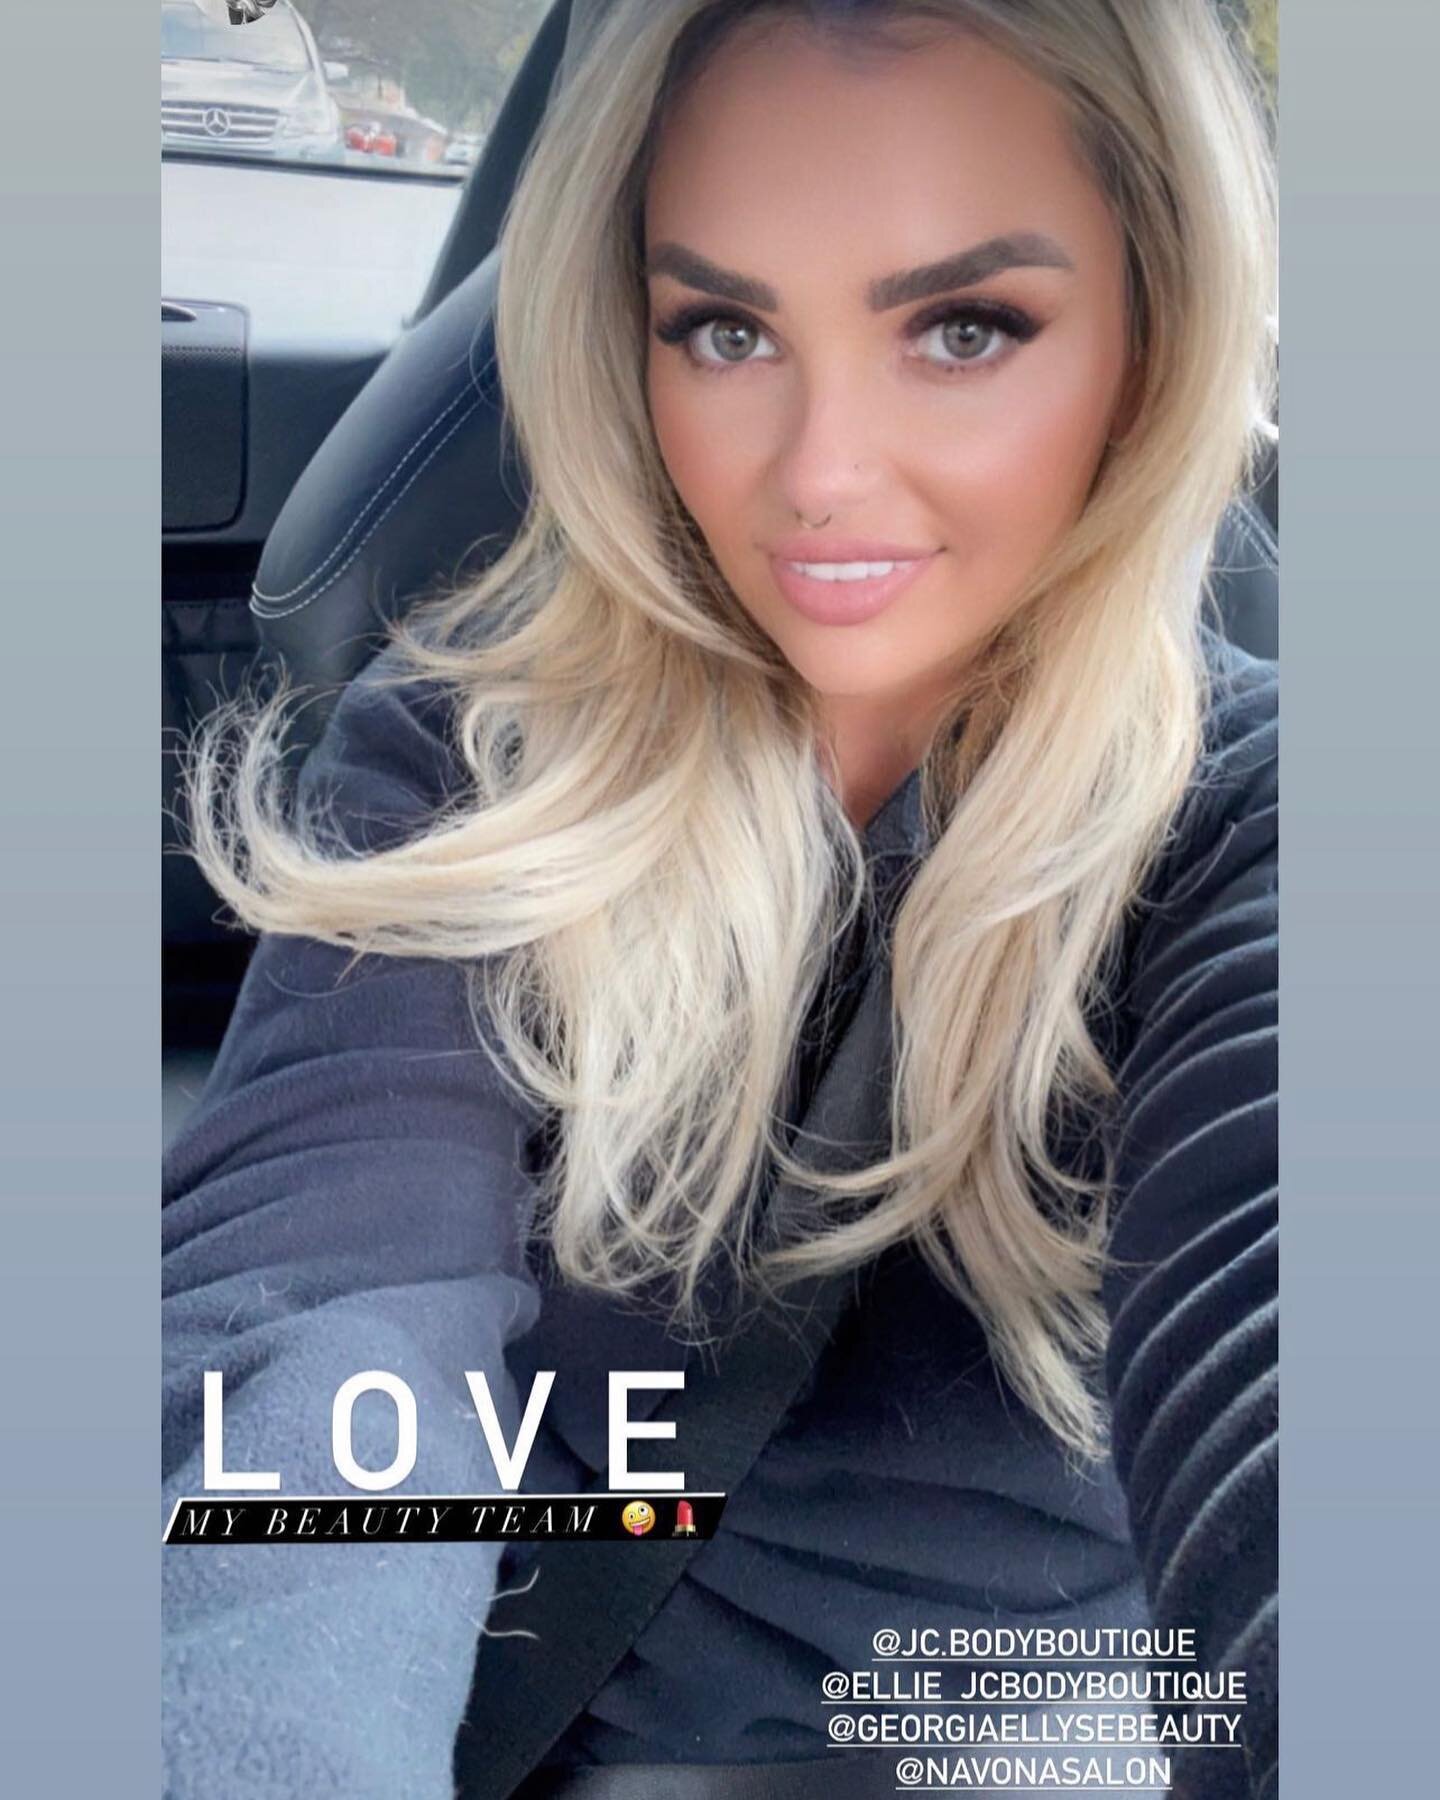 Love a client car selfie, hair extensions and color created by Rocco. #blondehair #hairexstensions #ashblonde #ashblondebalayage